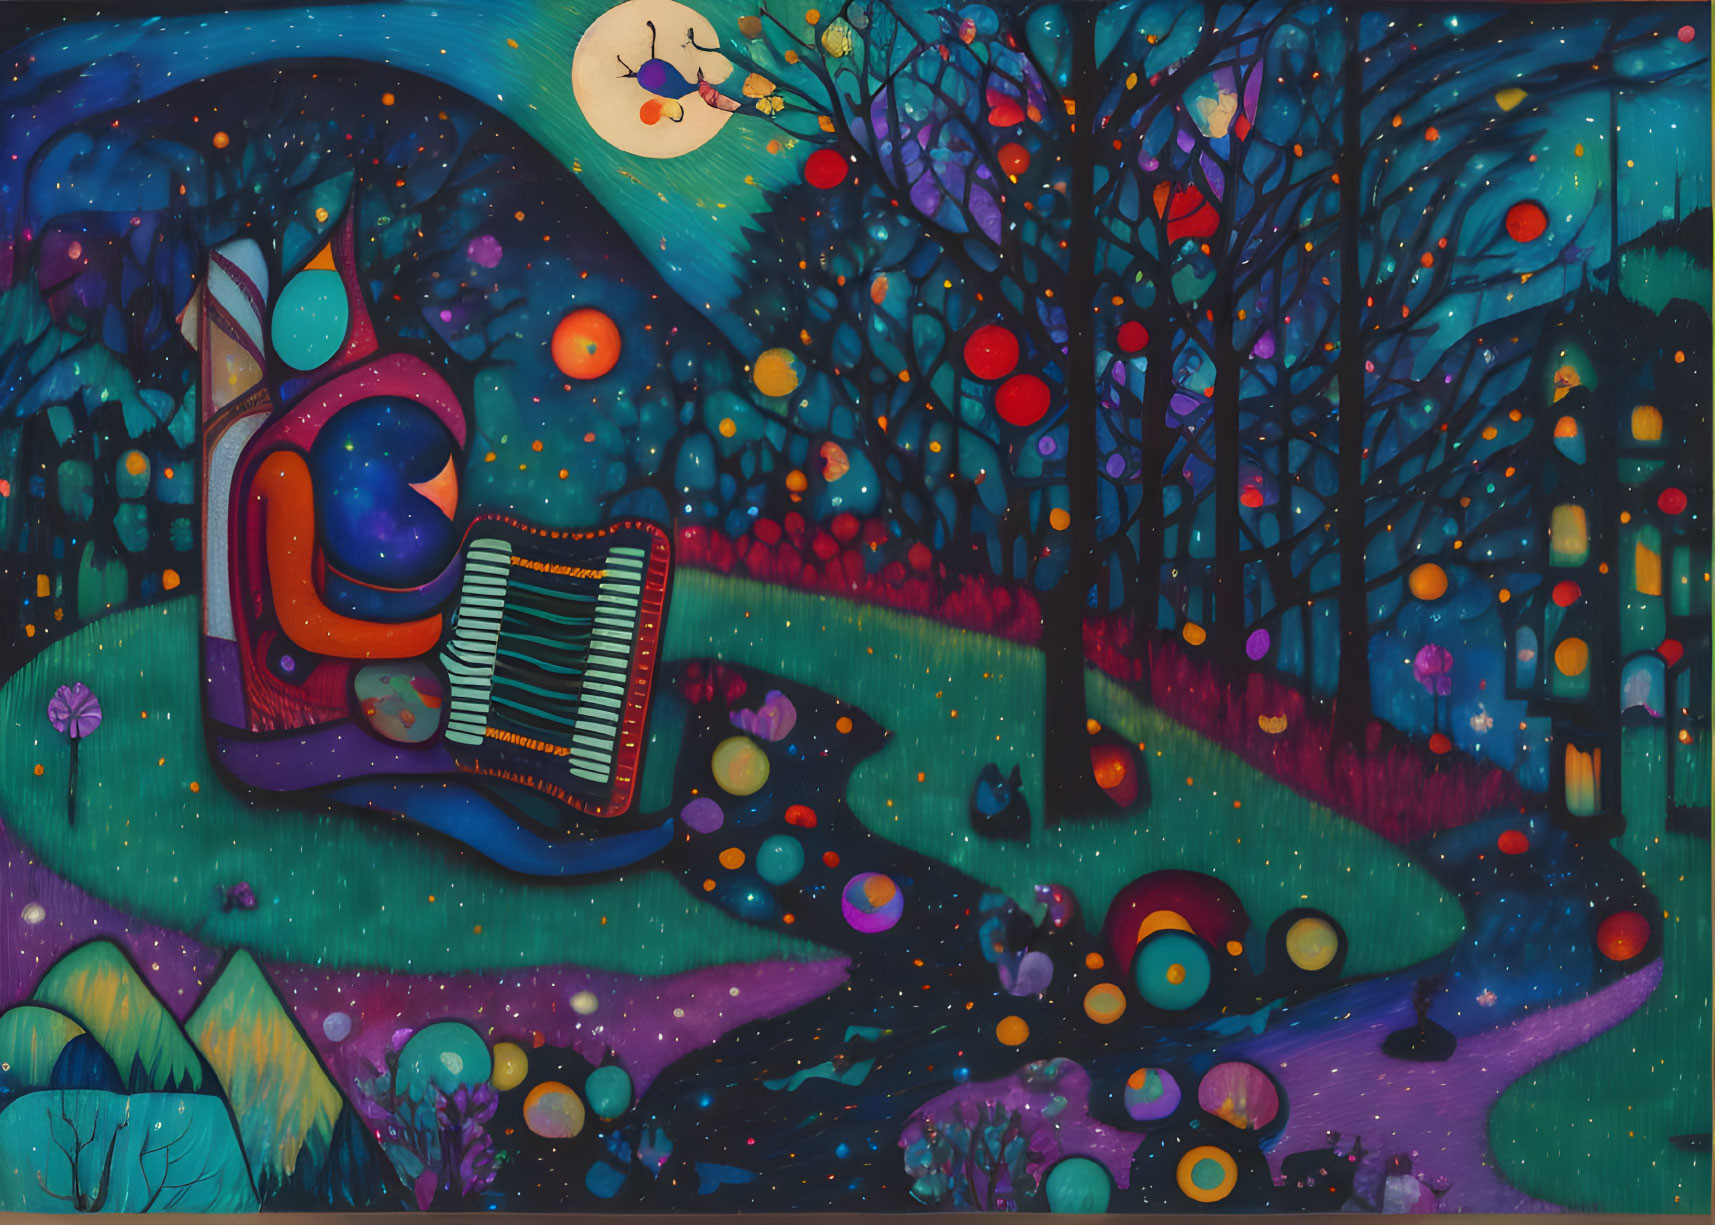 Accordion Player by Moonlight